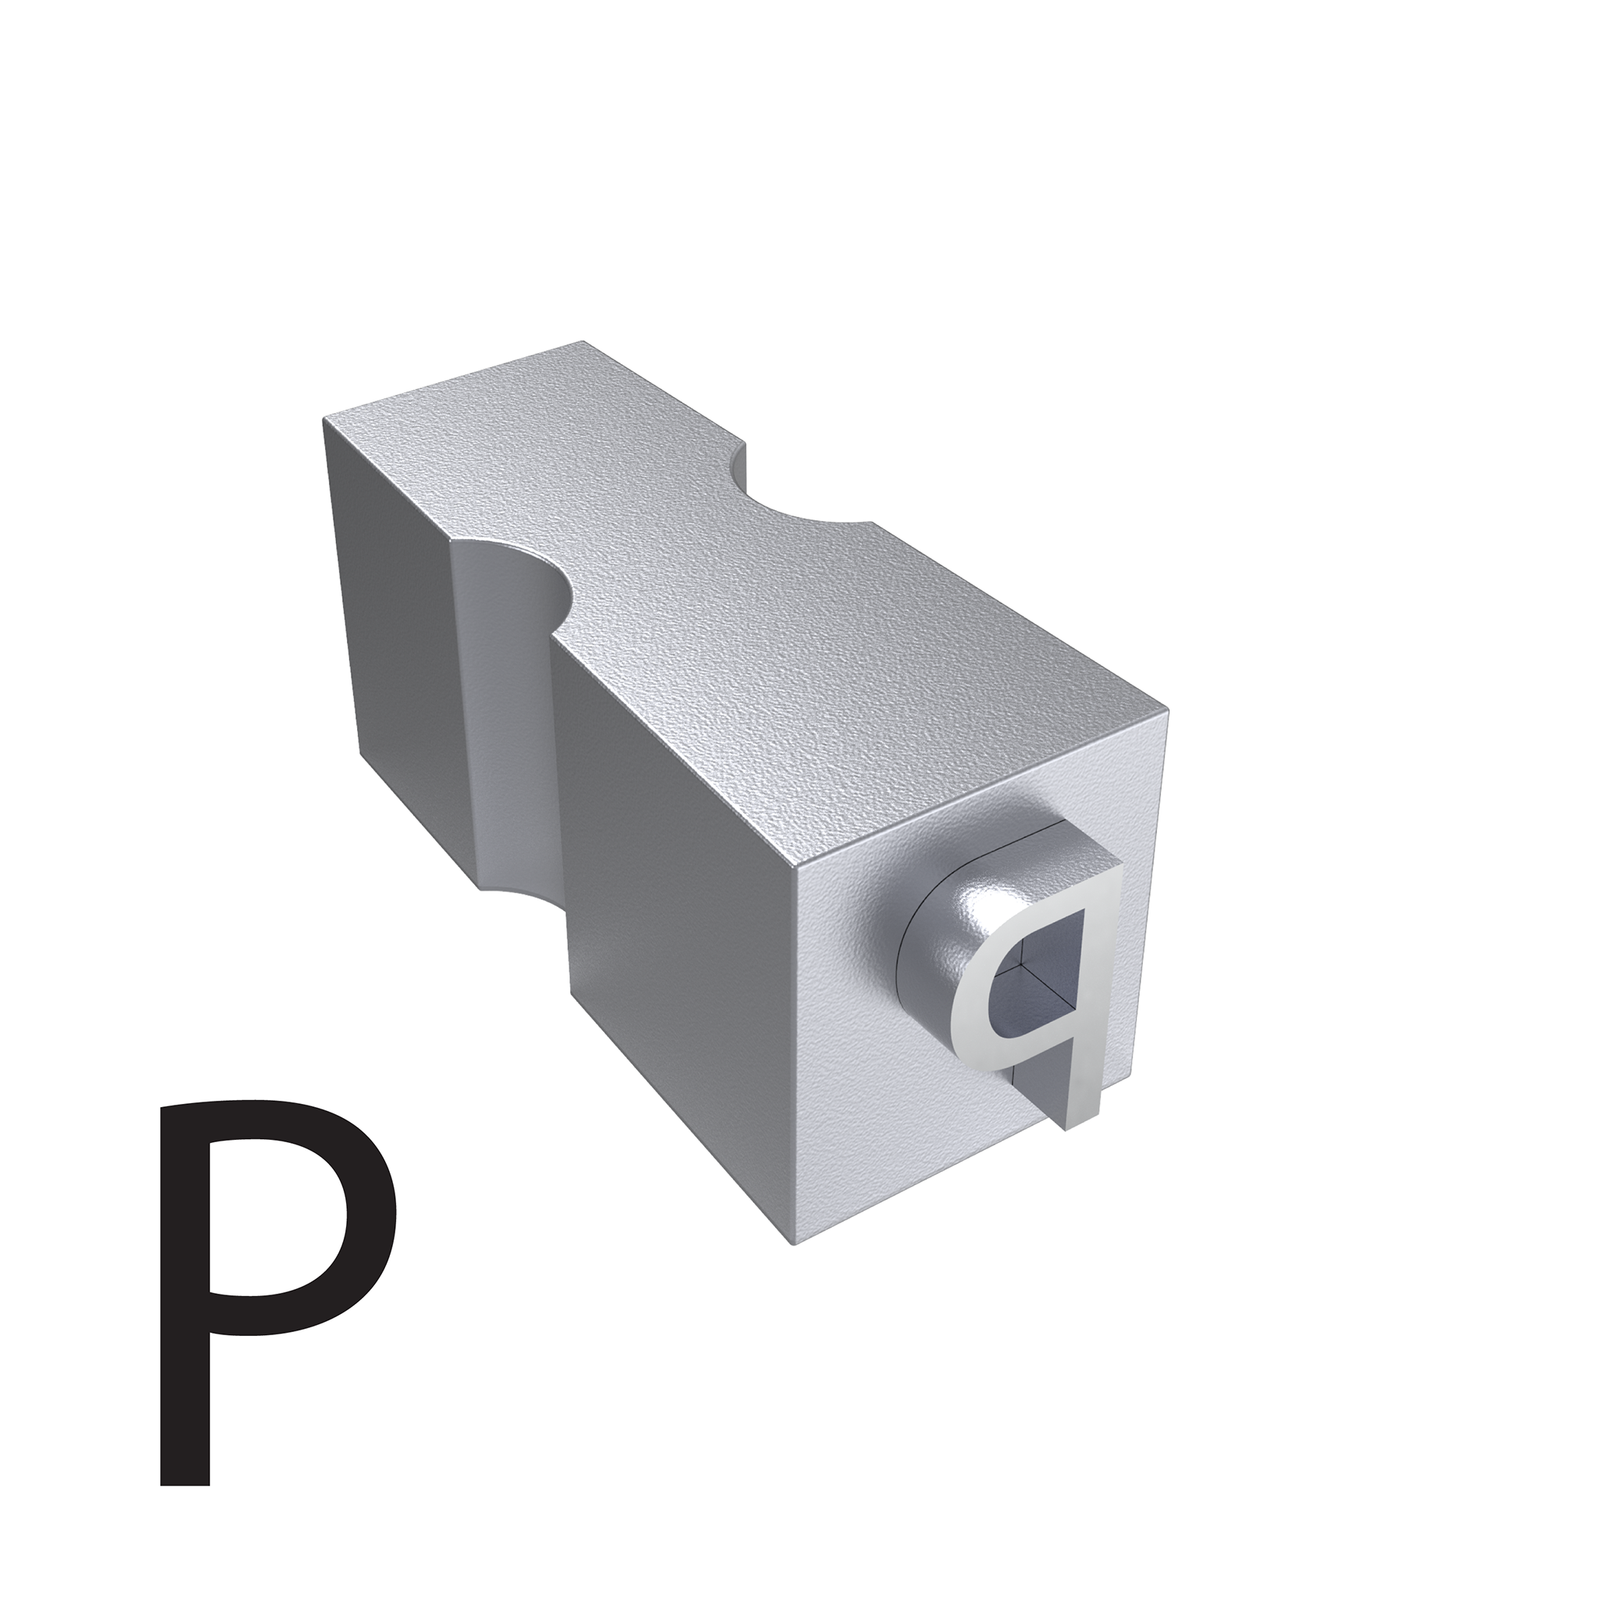 Type of letter P for hot ink roll printers